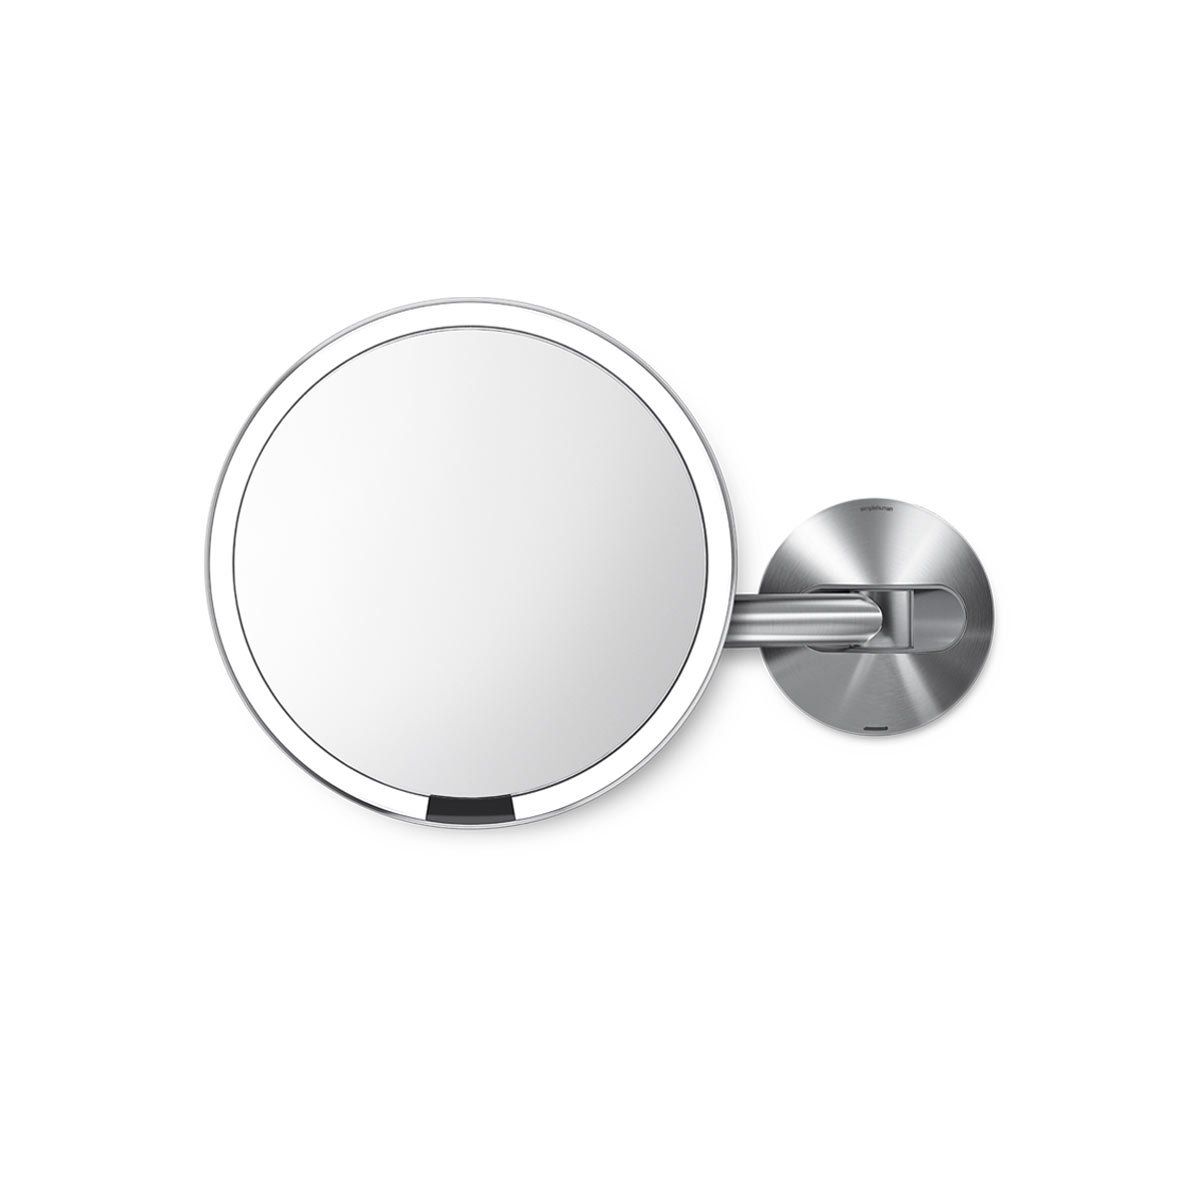 10 Best Lighted Makeup Mirrors 2021, Best Magnifying Vanity Mirror With Lights